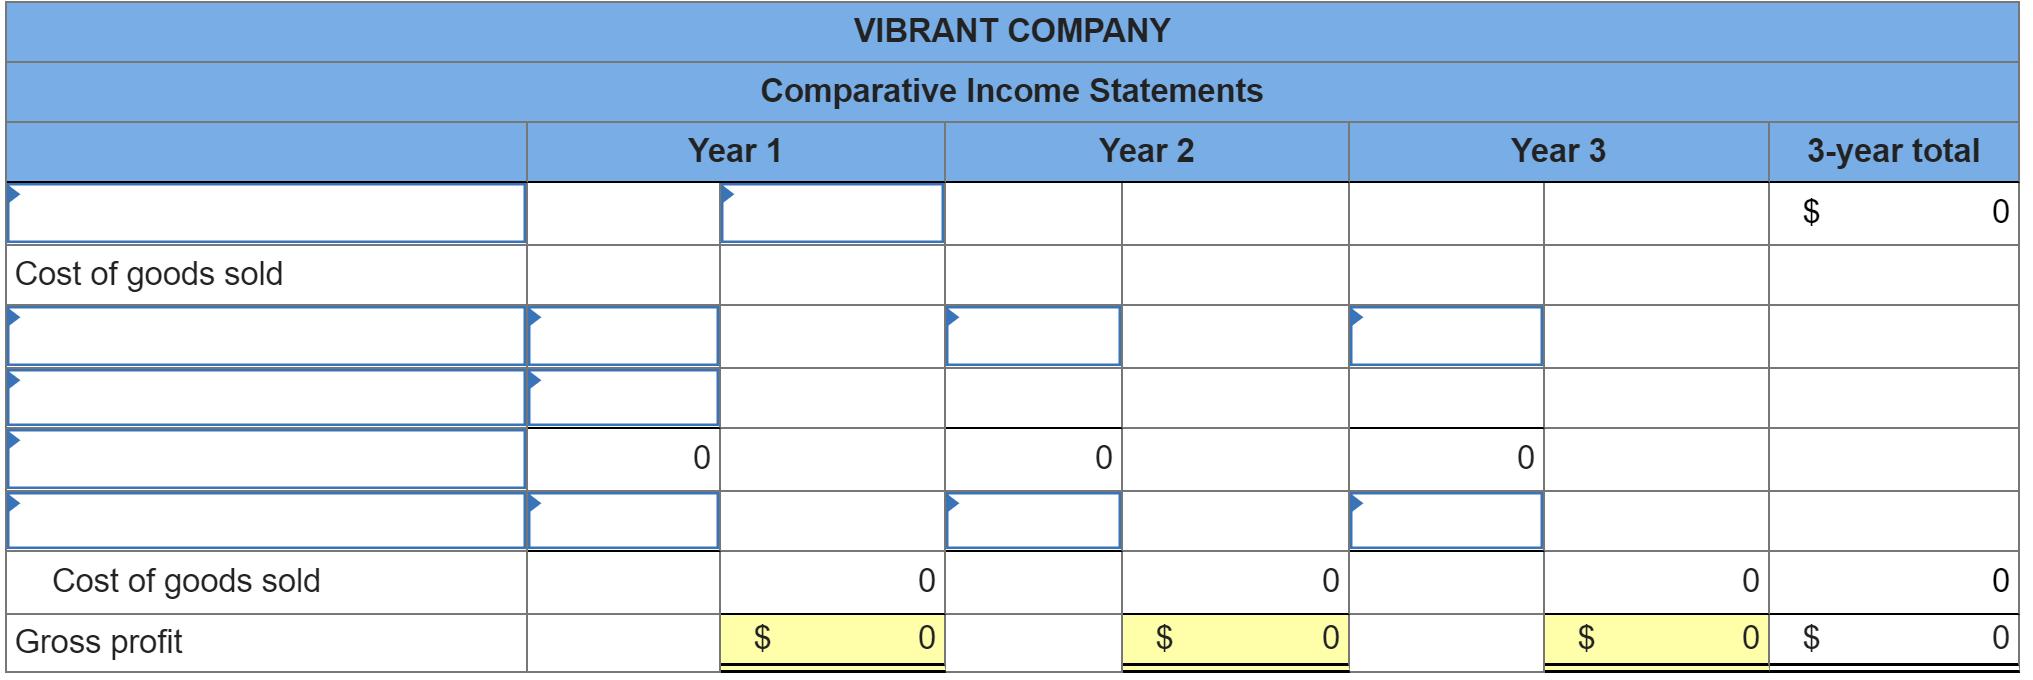 VIBRANT COMPANY Comparative Income Statements Year 1 Year 2 Year 3 3-year total $0 Cost of goods sold o0 o0 00 0Cost of